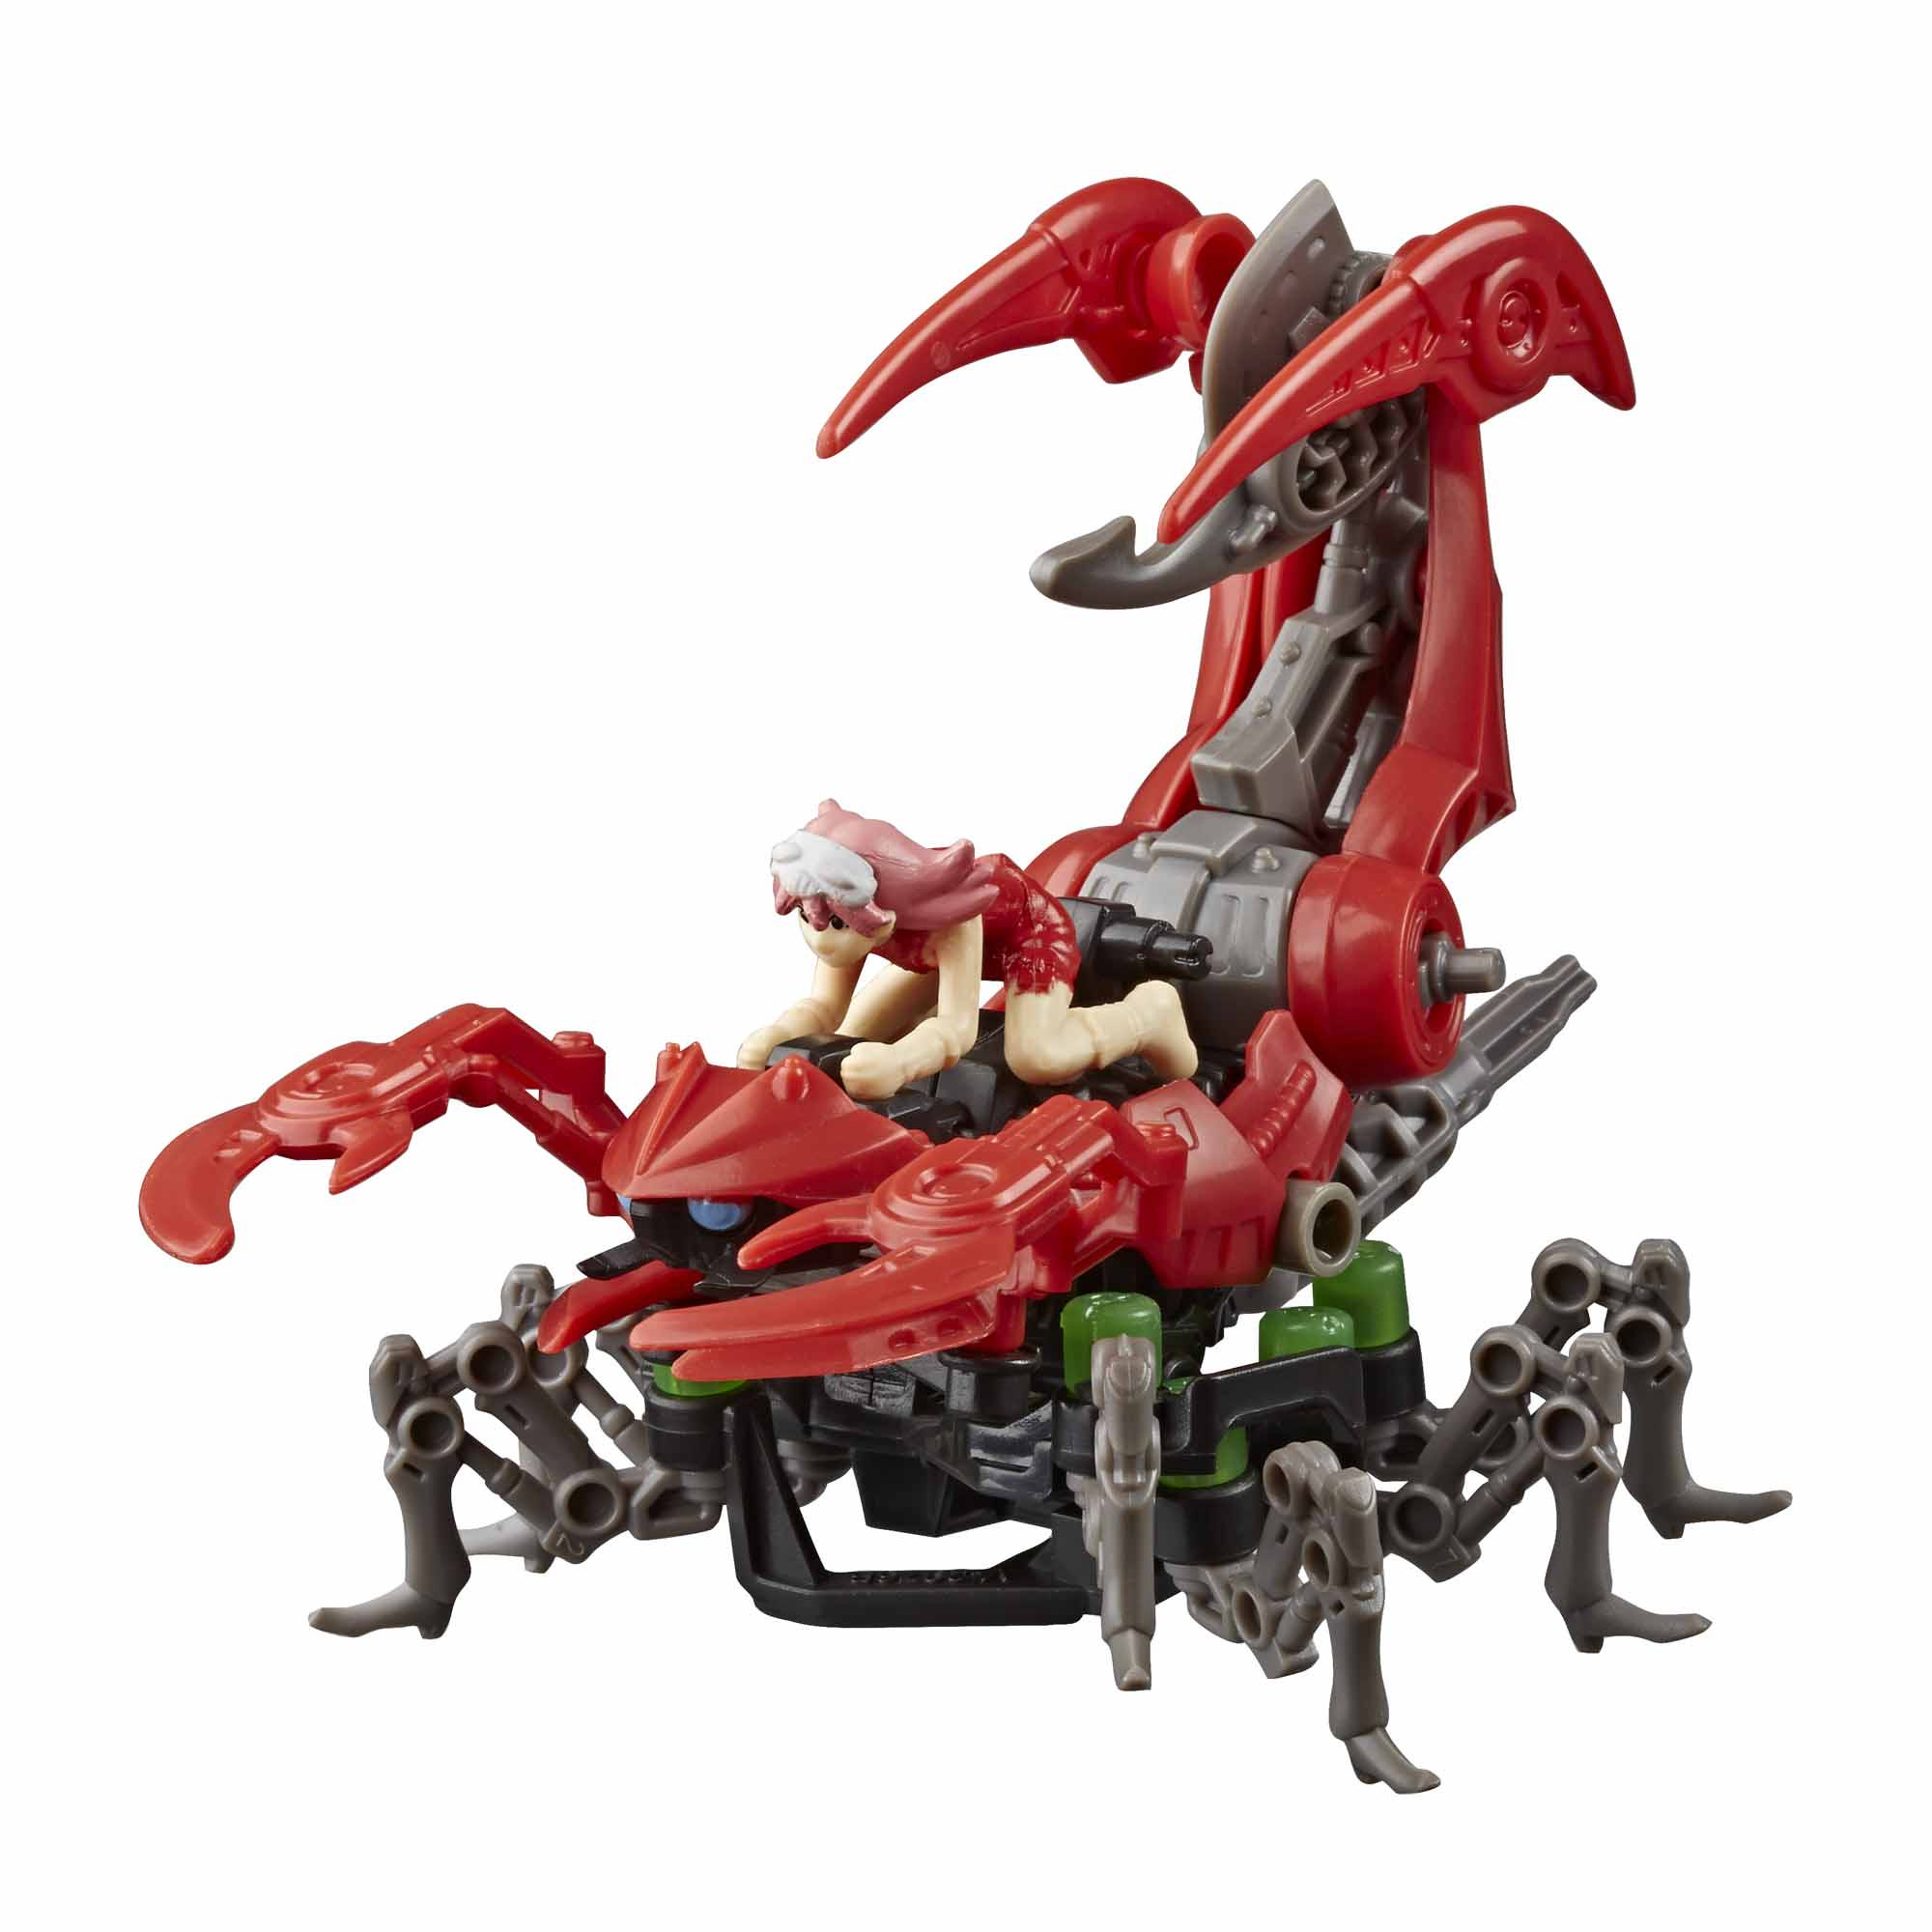 Zoids Mega Battlers Needle - Scorpion -Type Buildable Beast Figure, Wind-Up Motion - Kids Toys Ages 8 and Up, 33 Pieces